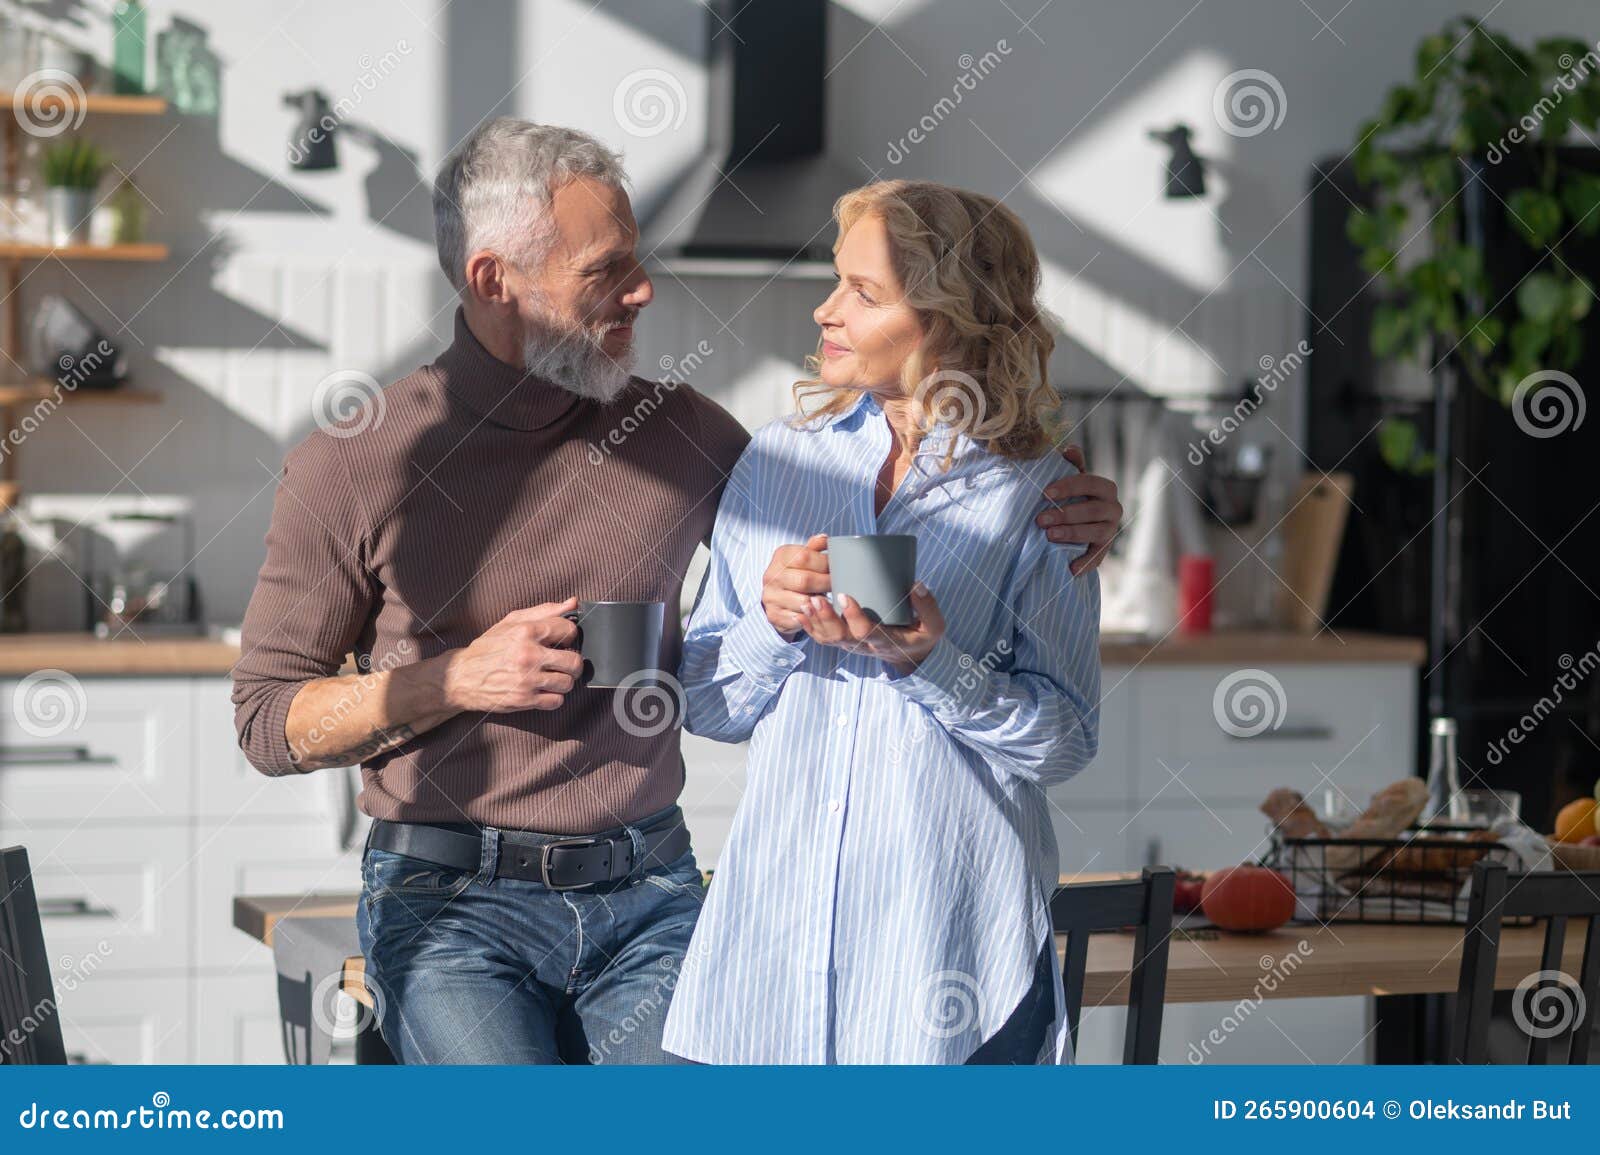 Mature Couple Having Morning Coffee Andtalking In The Kitchen Stock